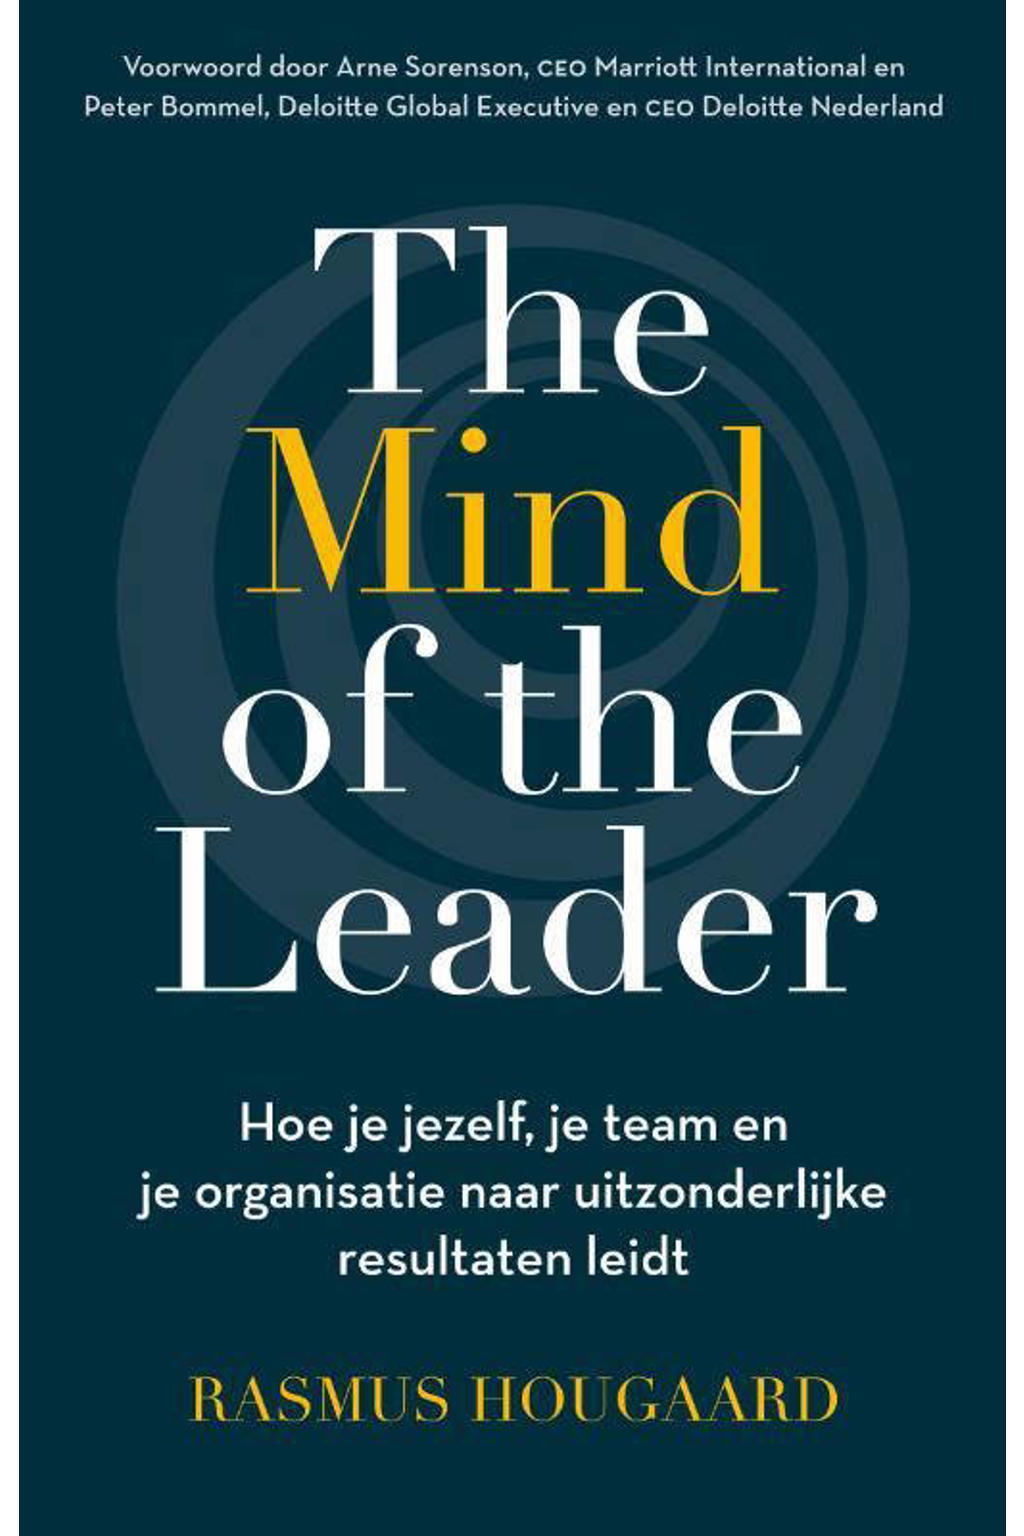 The Mind of the Leader - Rasmus Hougaard